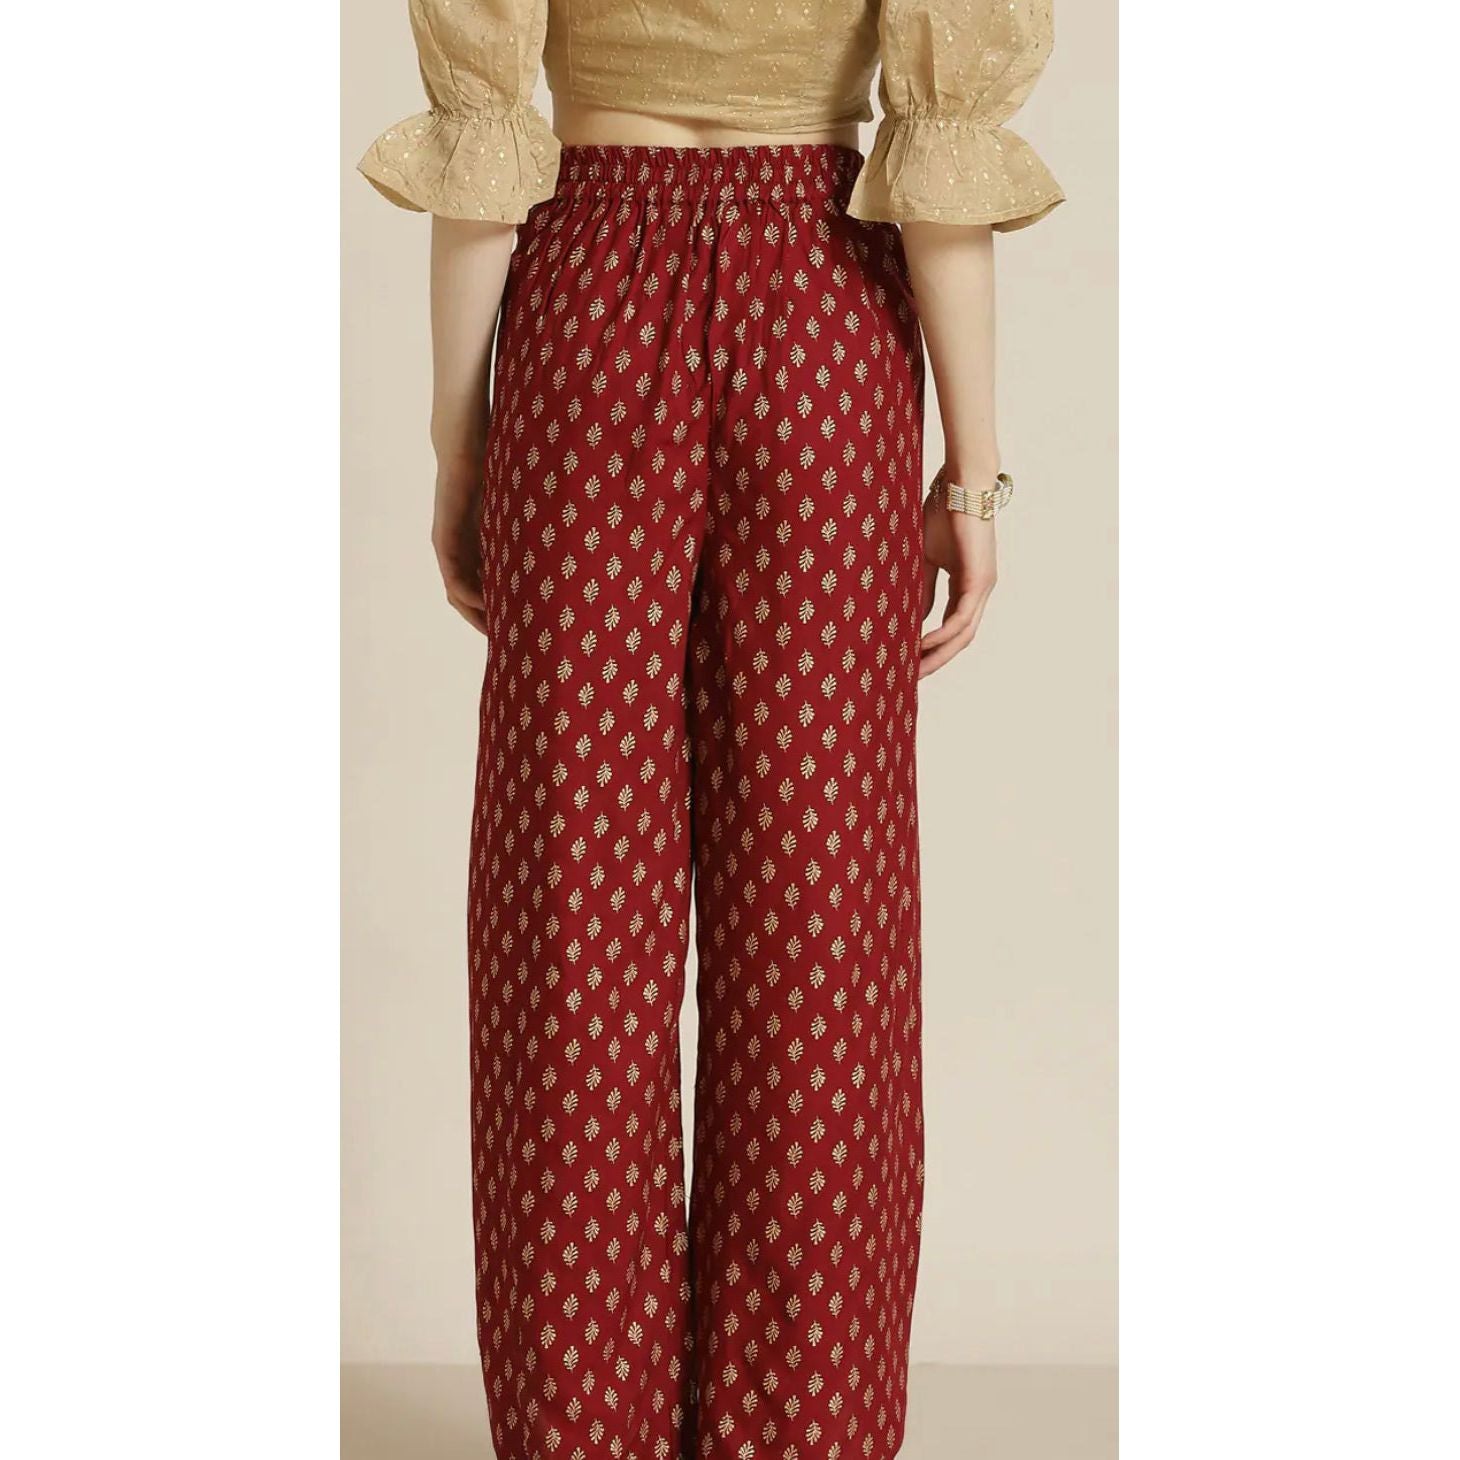 Dhoti pants for women, indo western wear, indo fusion wear. Maroon and gold prints dhoti pants with elastic waistband.